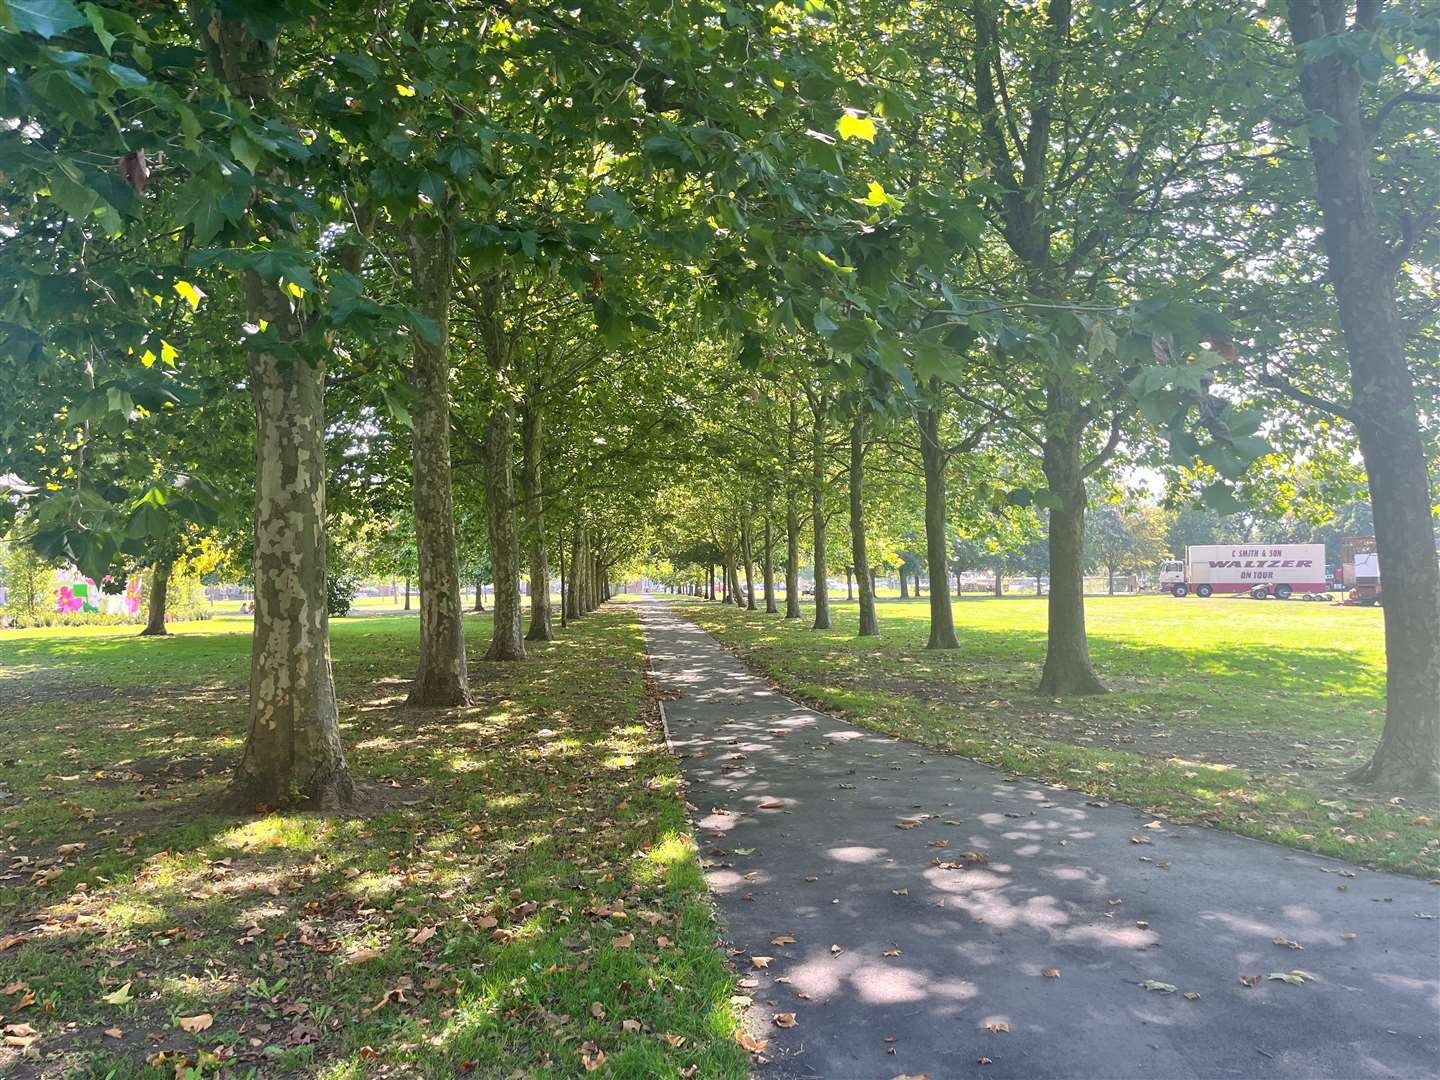 The paths lined with trees reminded us of Hyde Park in London